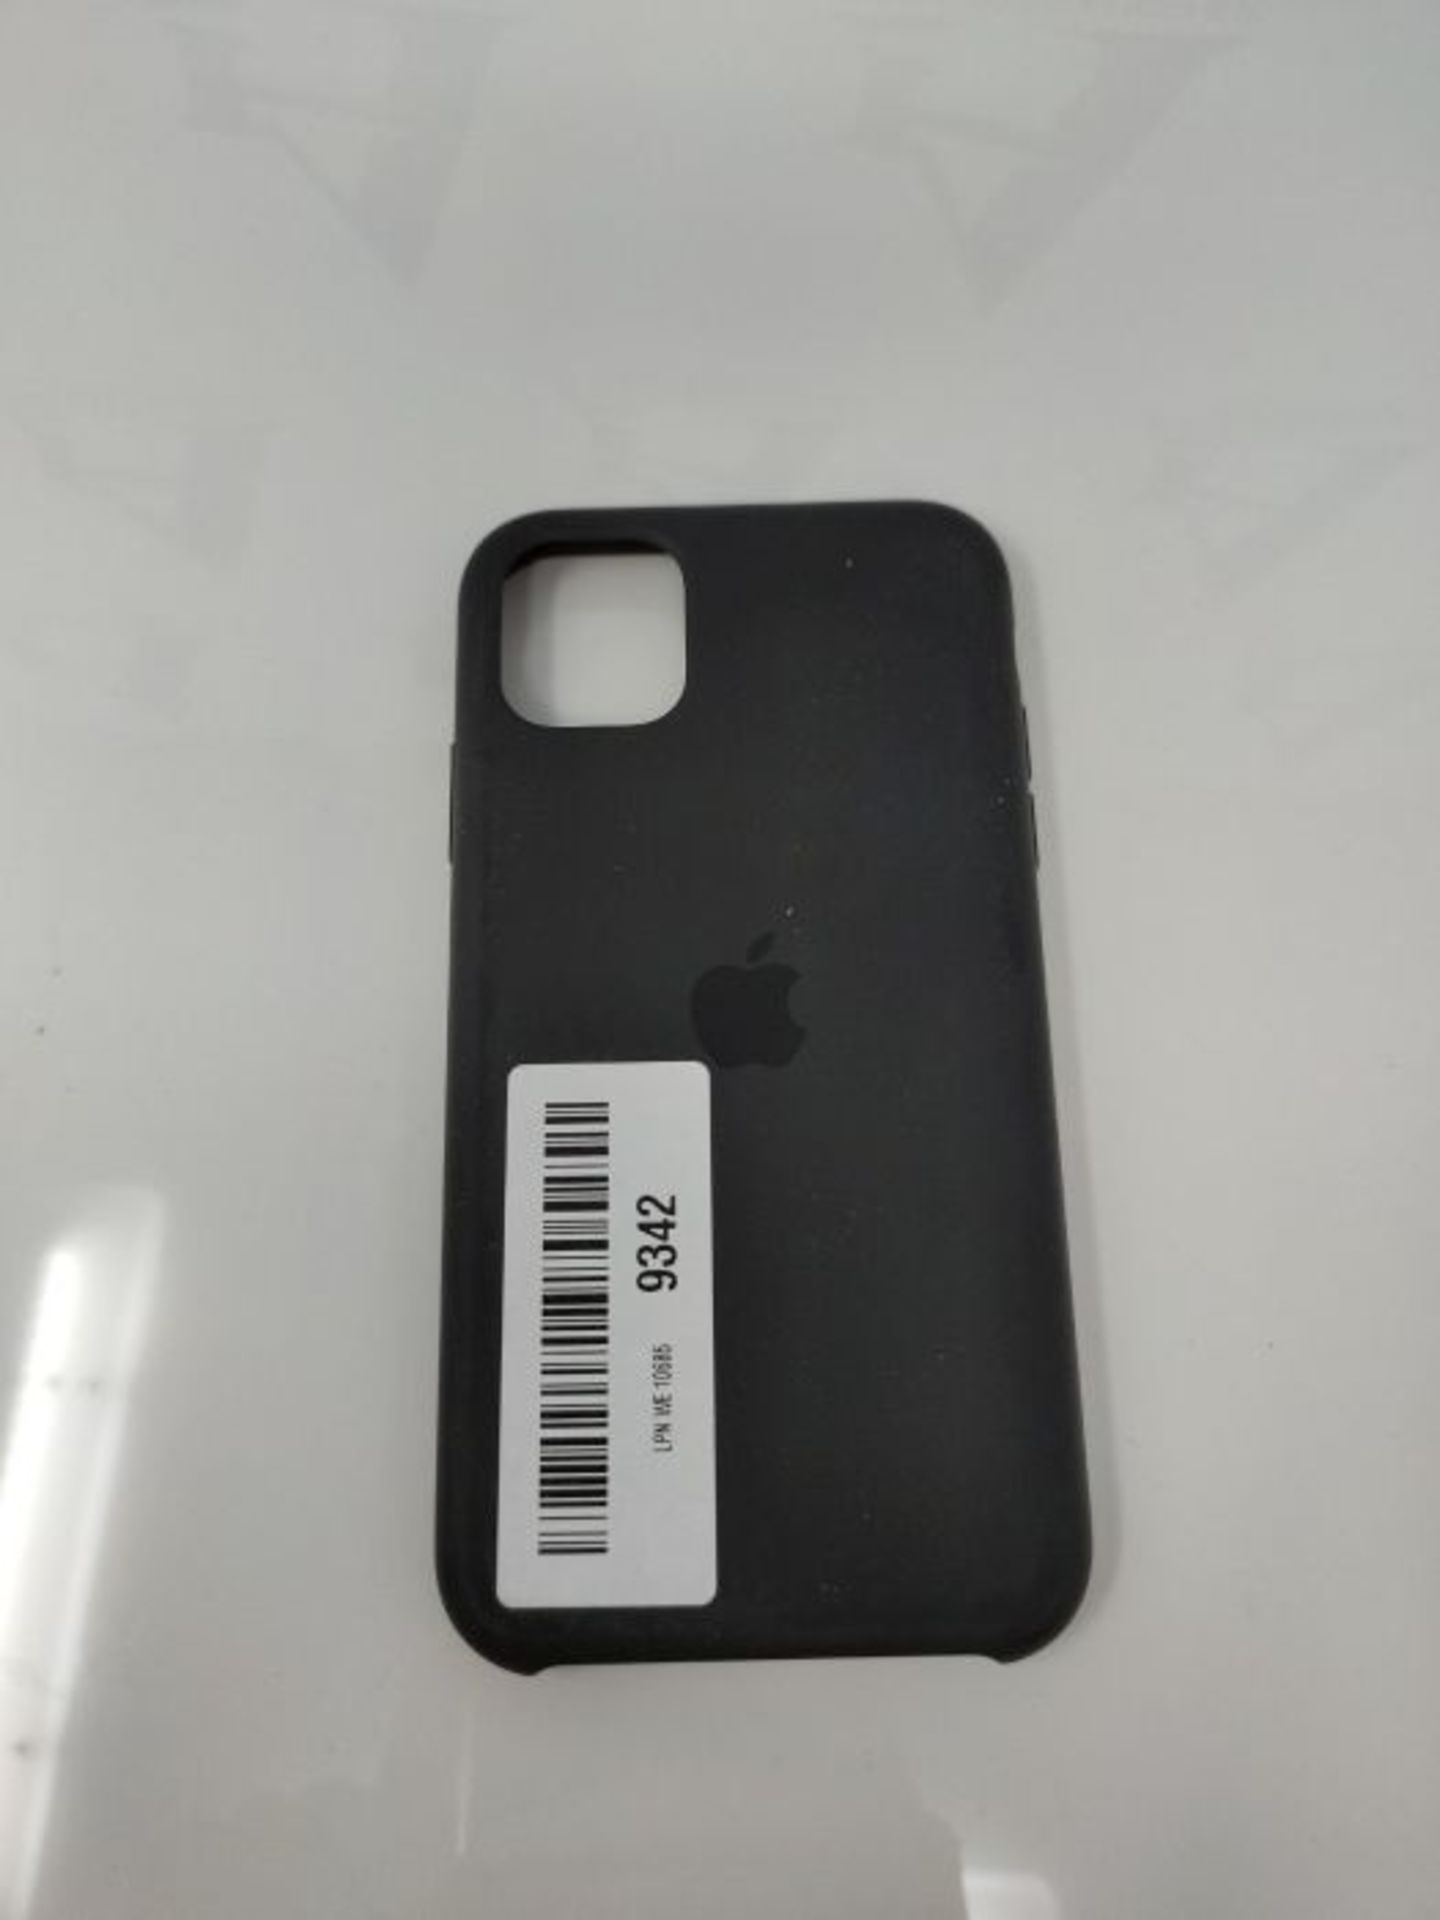 Apple Silicone Case (for iPhone 11) - Black - 6.06 inches - Image 3 of 3